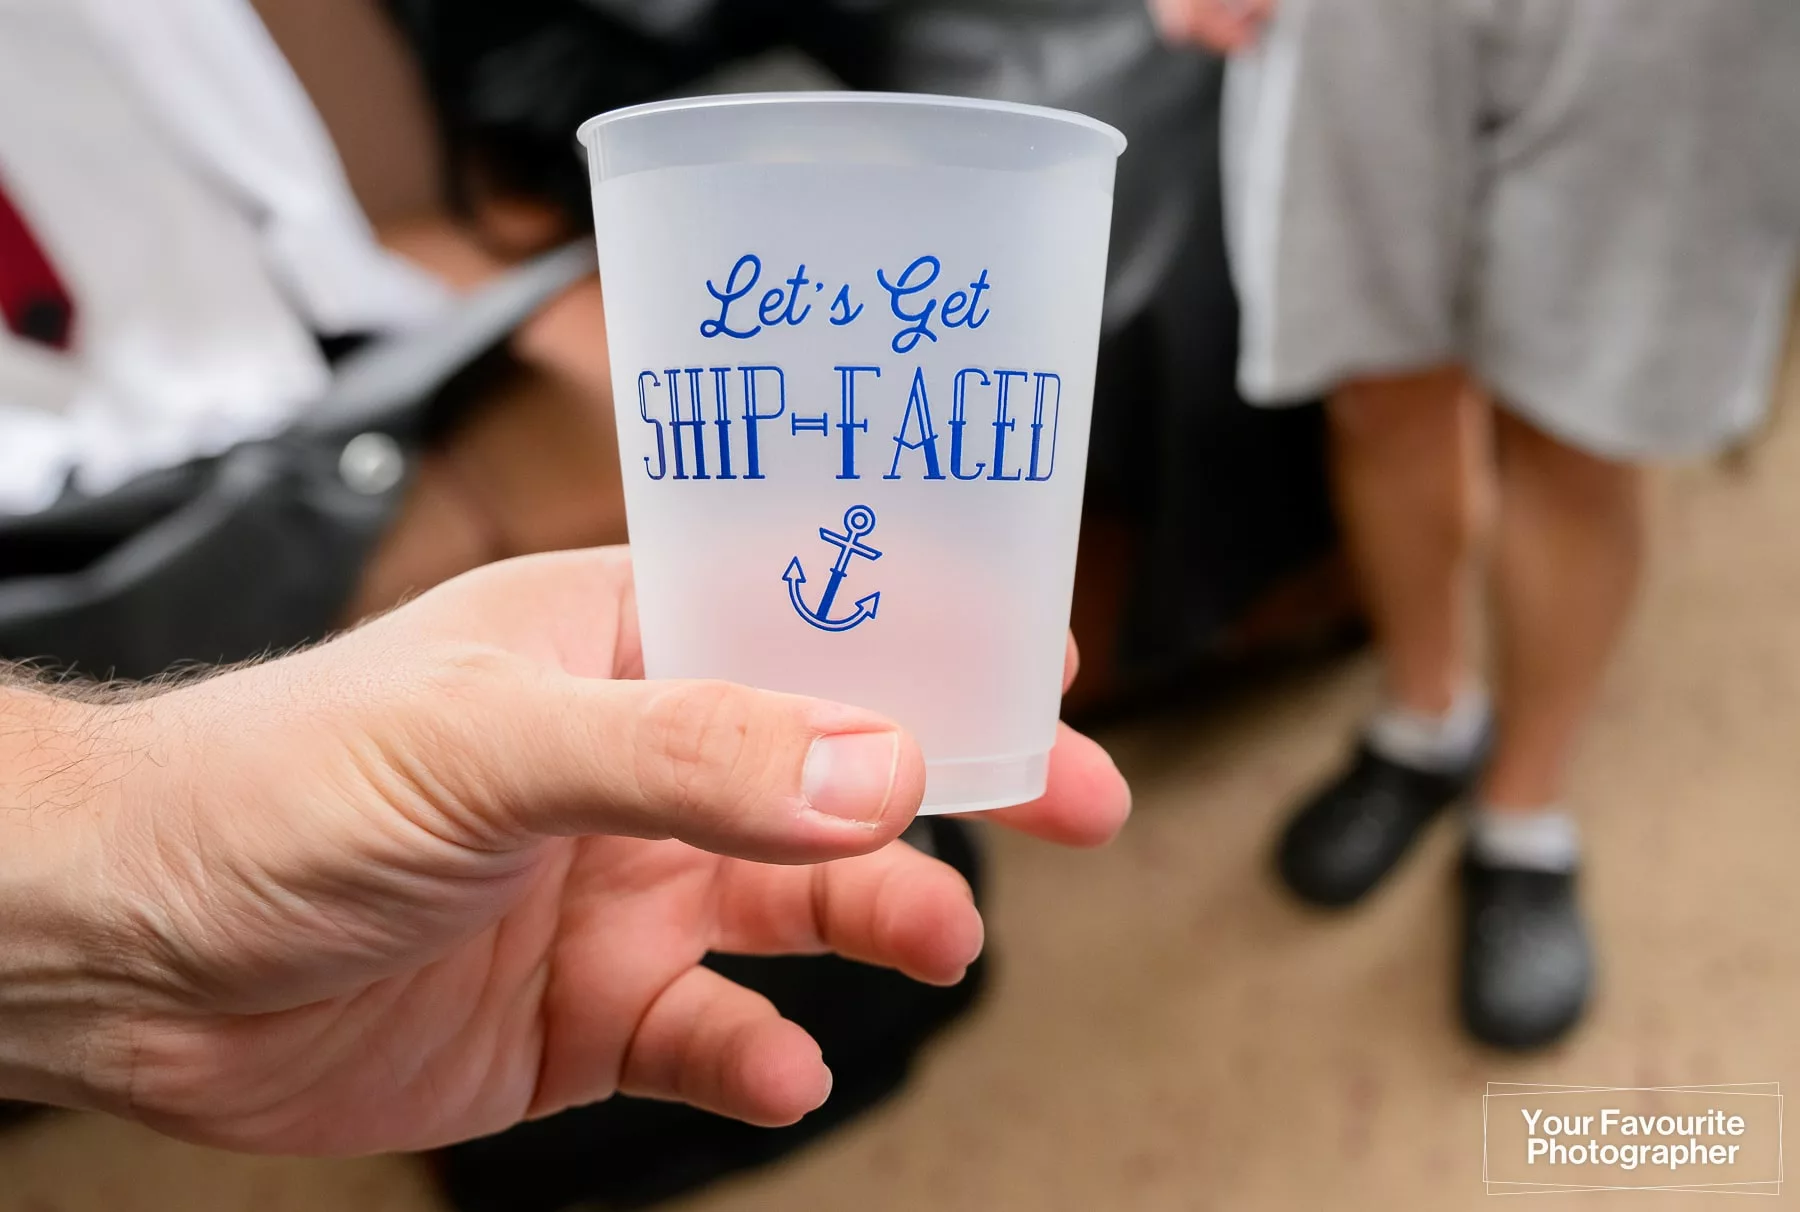 "Let's get ship-faced" plastic cup for a boat cruise wedding